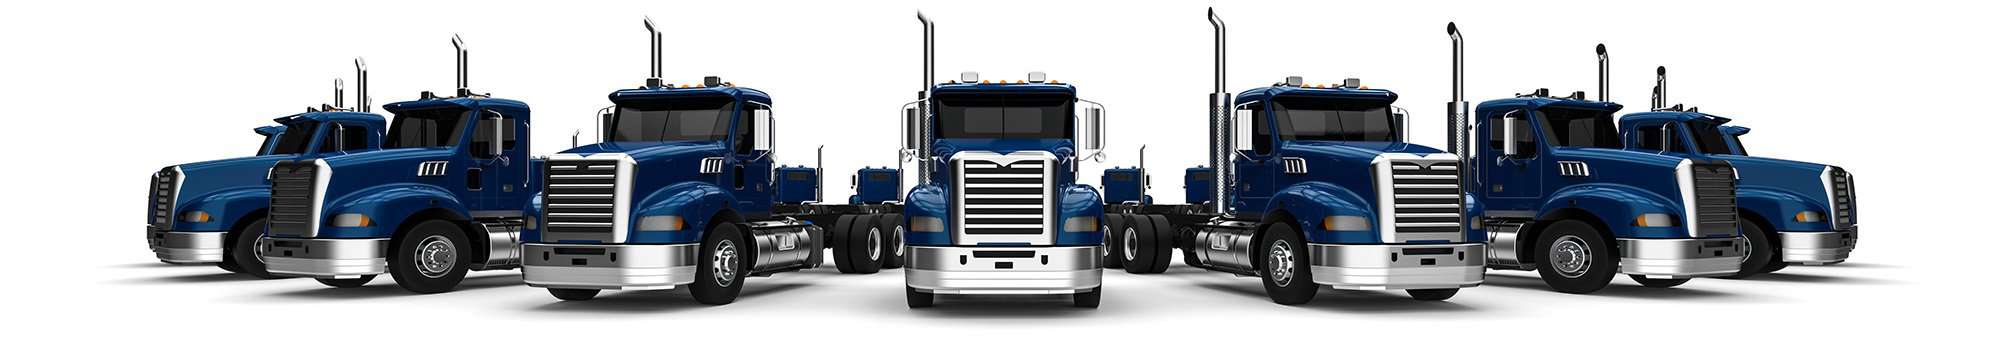 Commercial Vehicle Insurance Bel Air Maryland